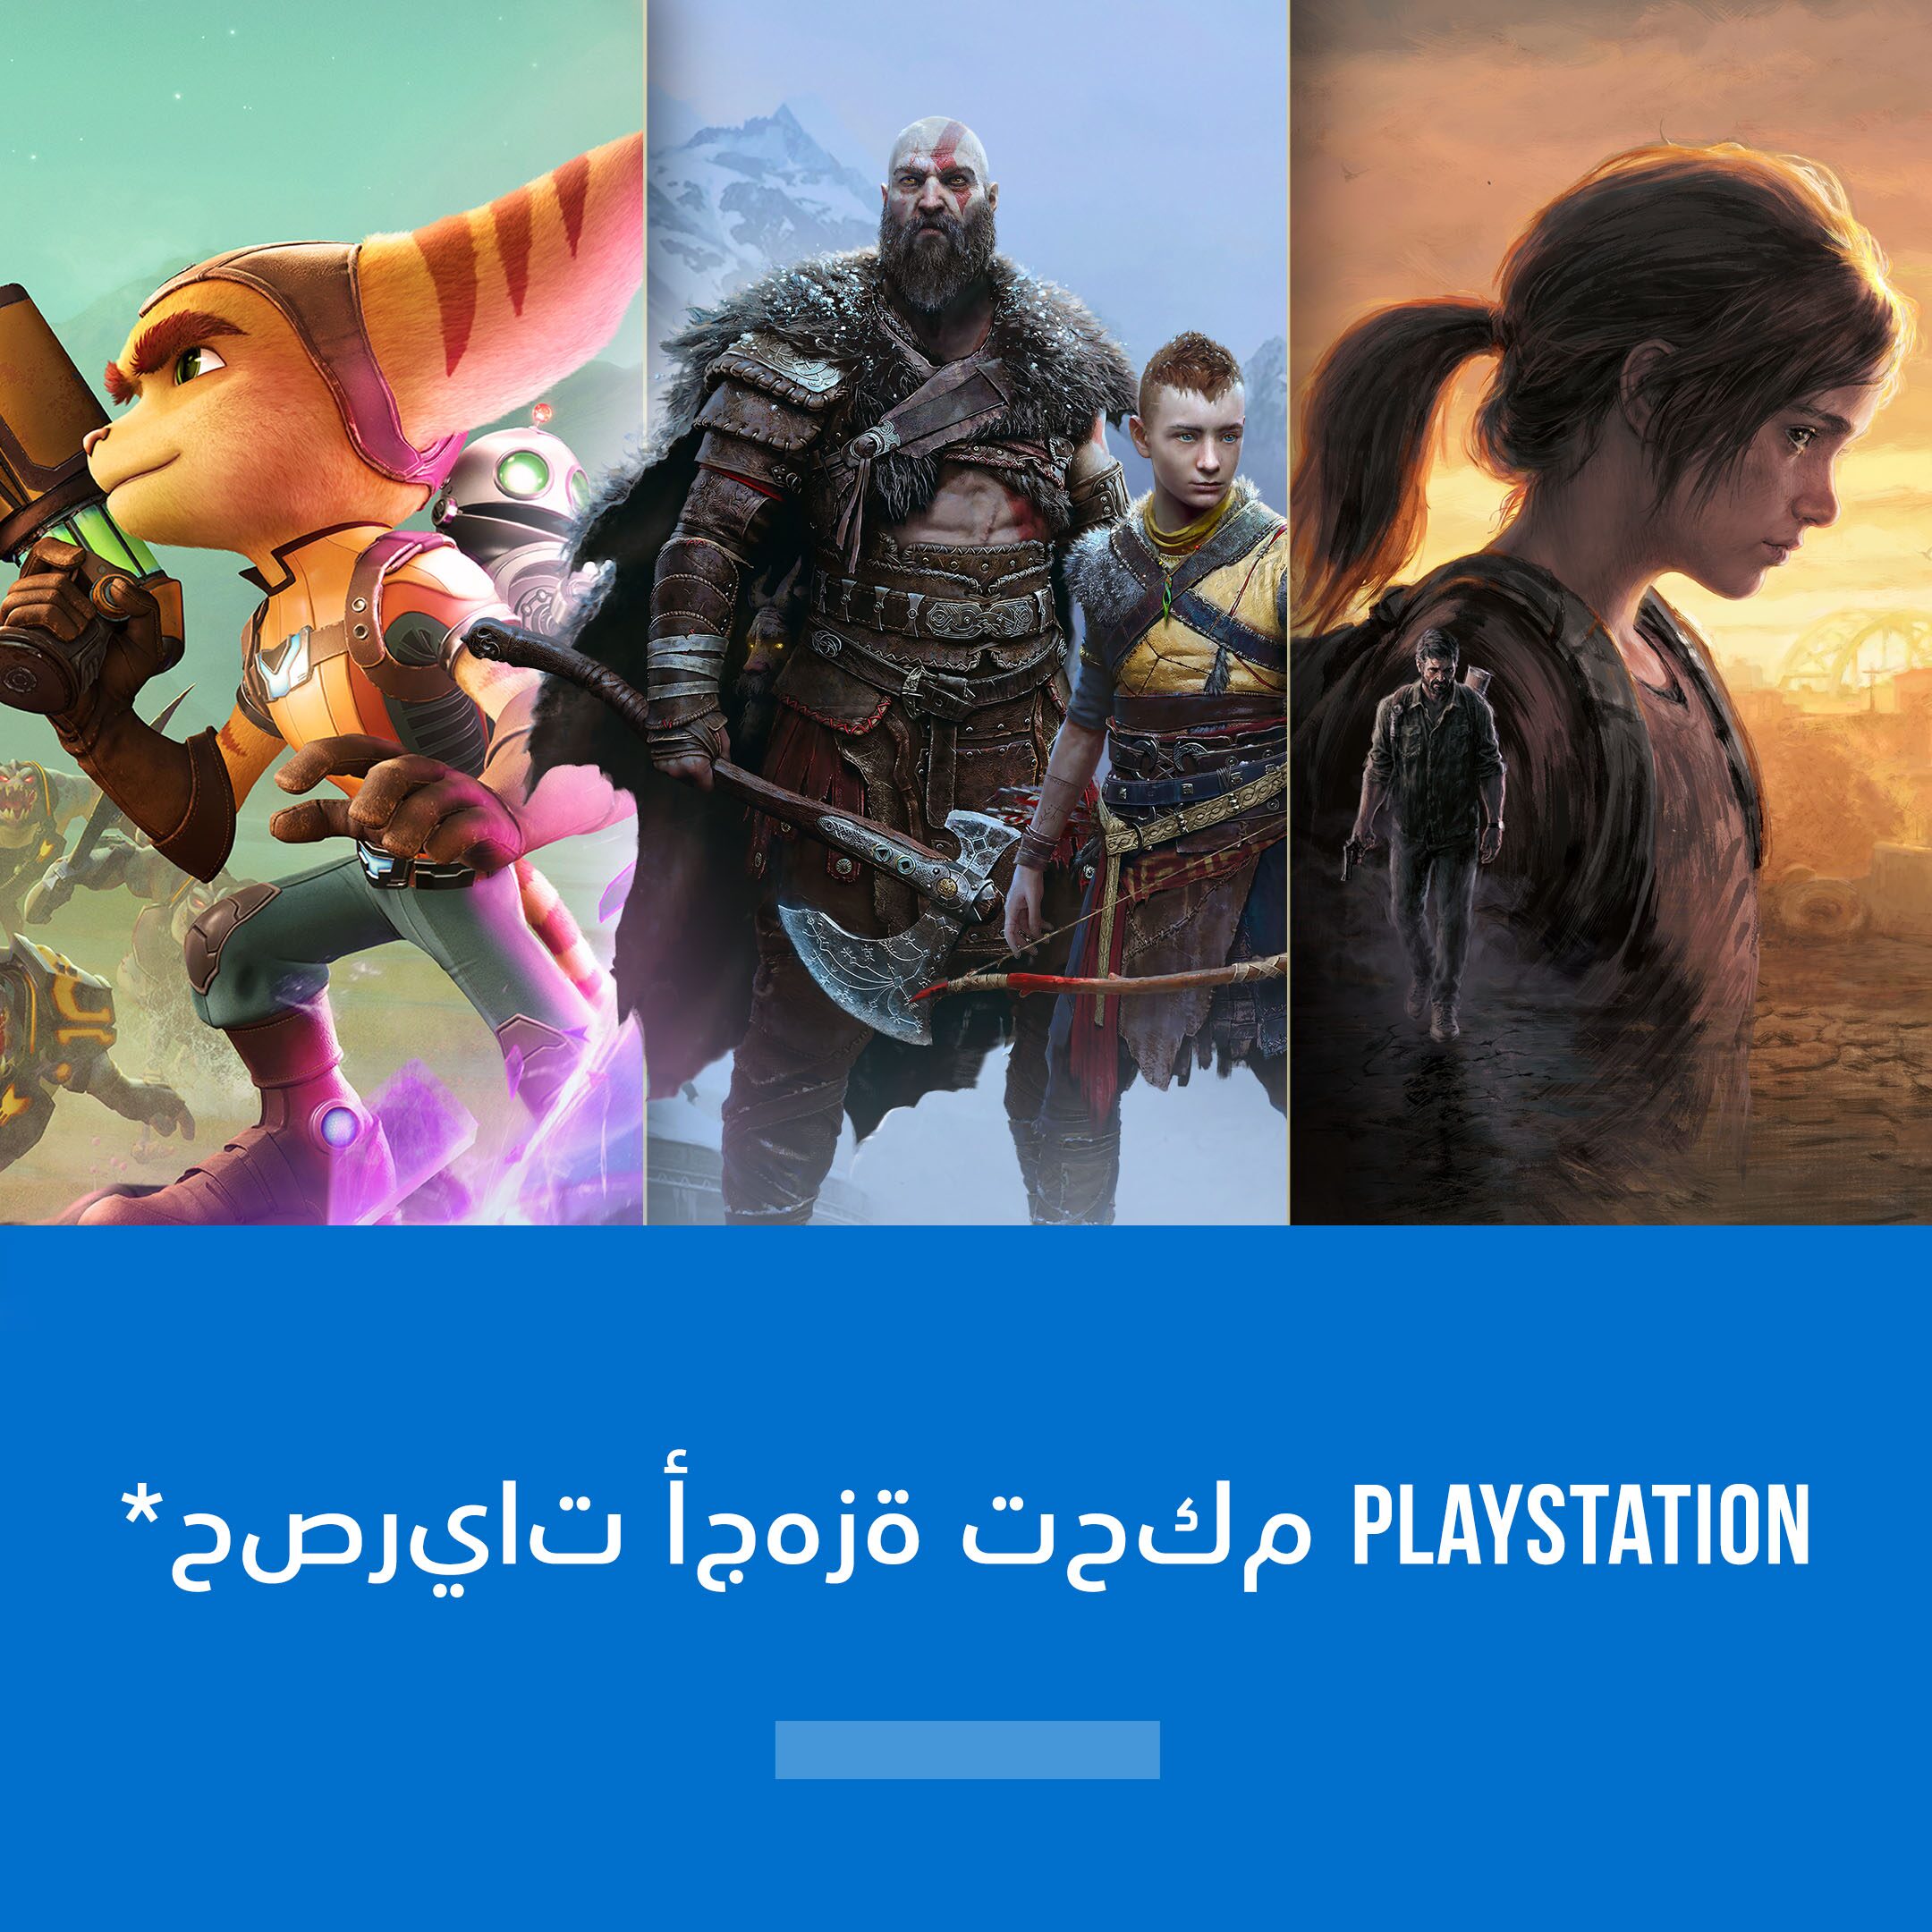 [EDITORIAL] PS Console Exclusives Mar 2023 Range S26